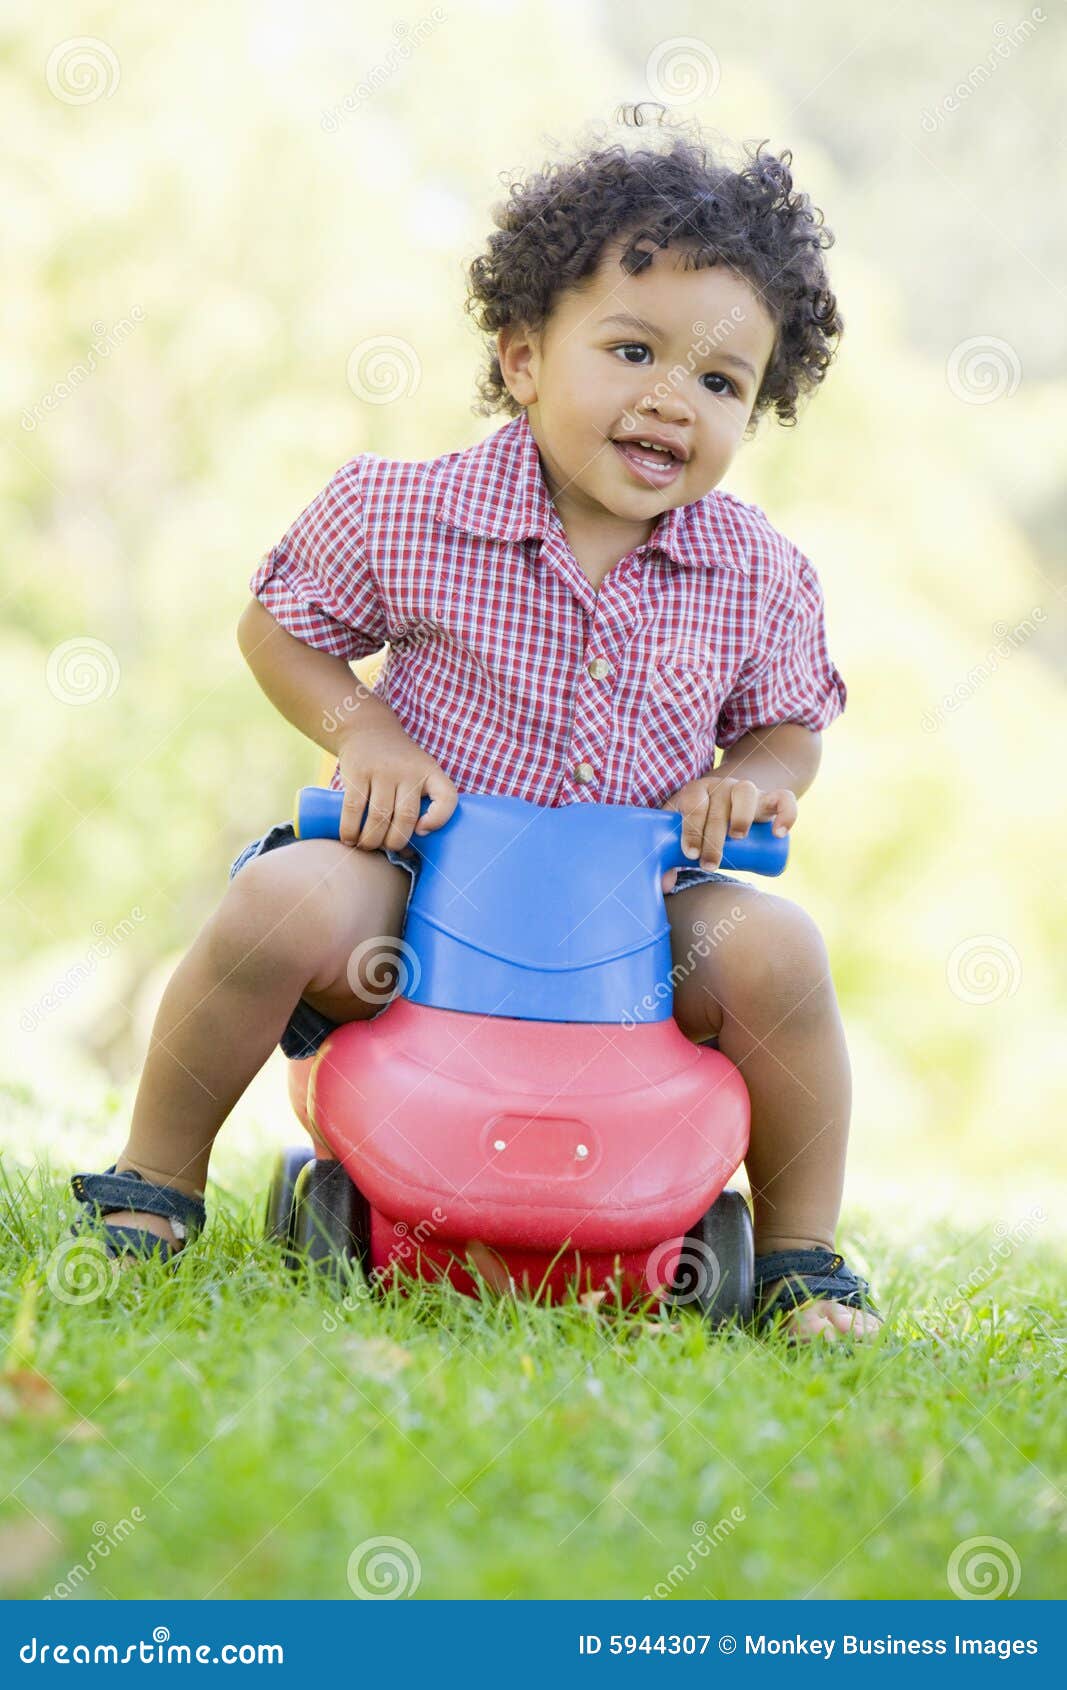 Young Boy Playing on Toy with Wheels Outdoors Stock Image - Image of ...